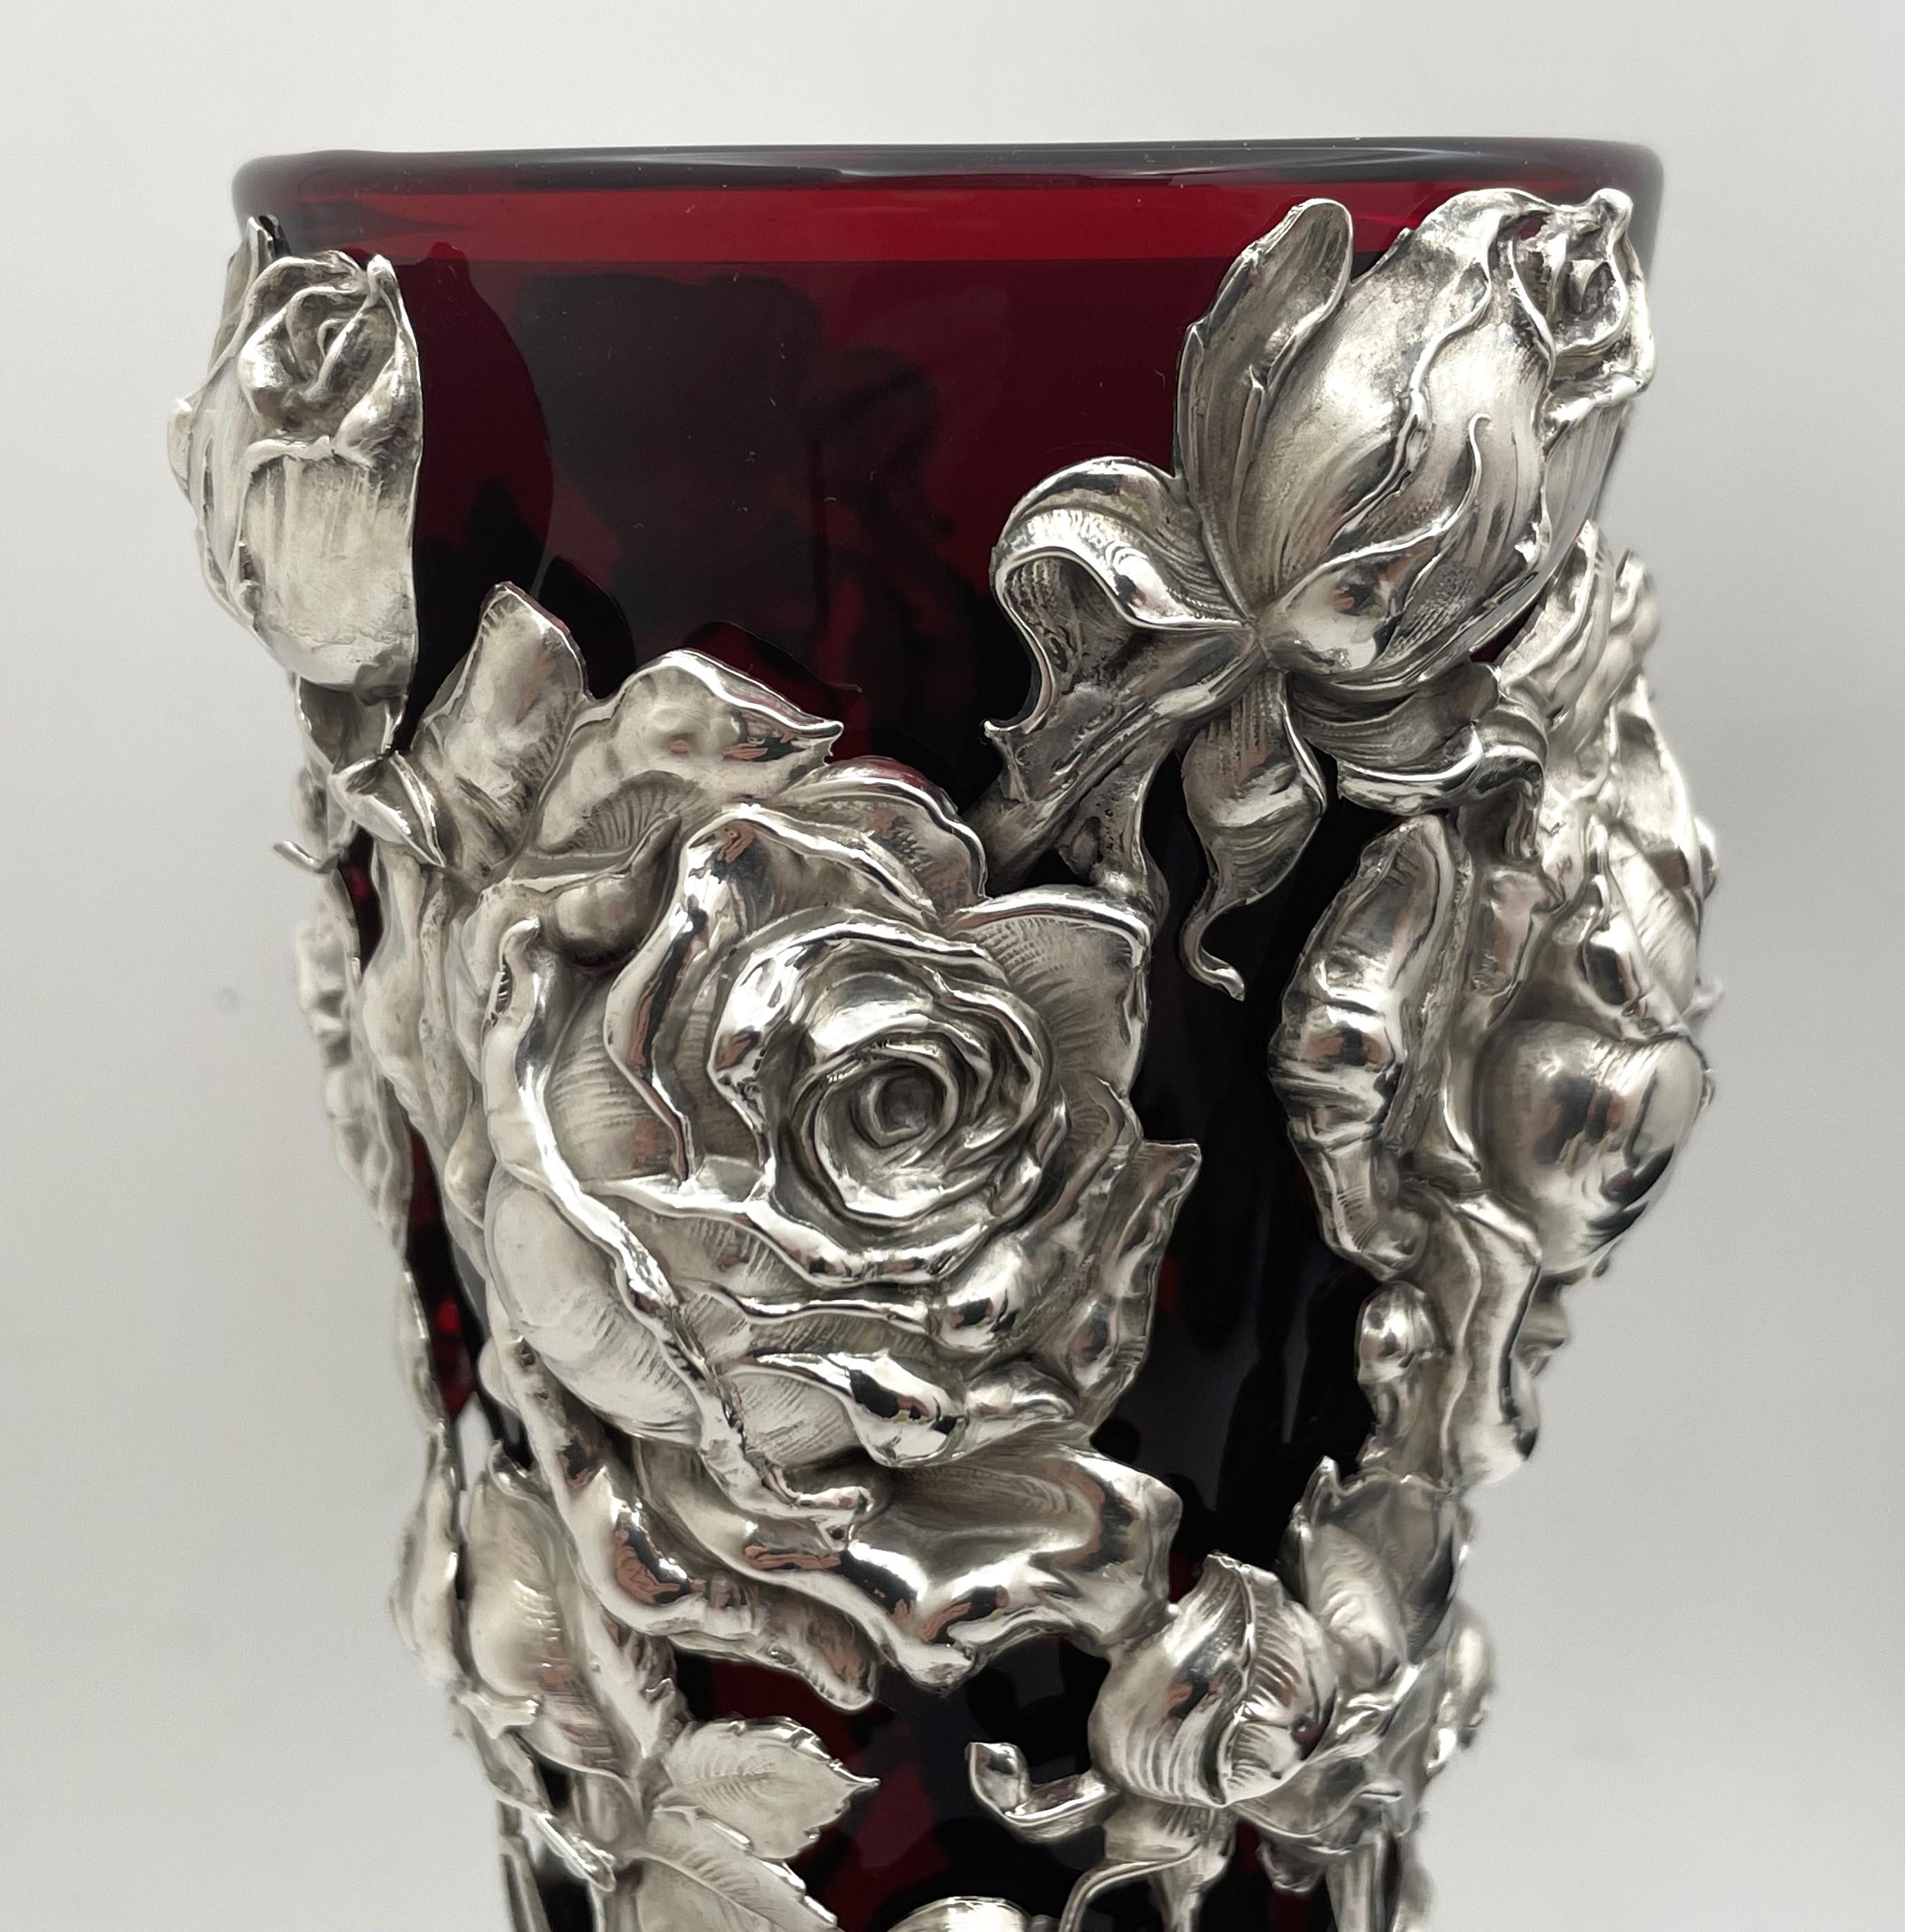  Gorham Sterling Silver Vase in Art Nouveau Style with Dimensional Flowers In Good Condition For Sale In New York, NY